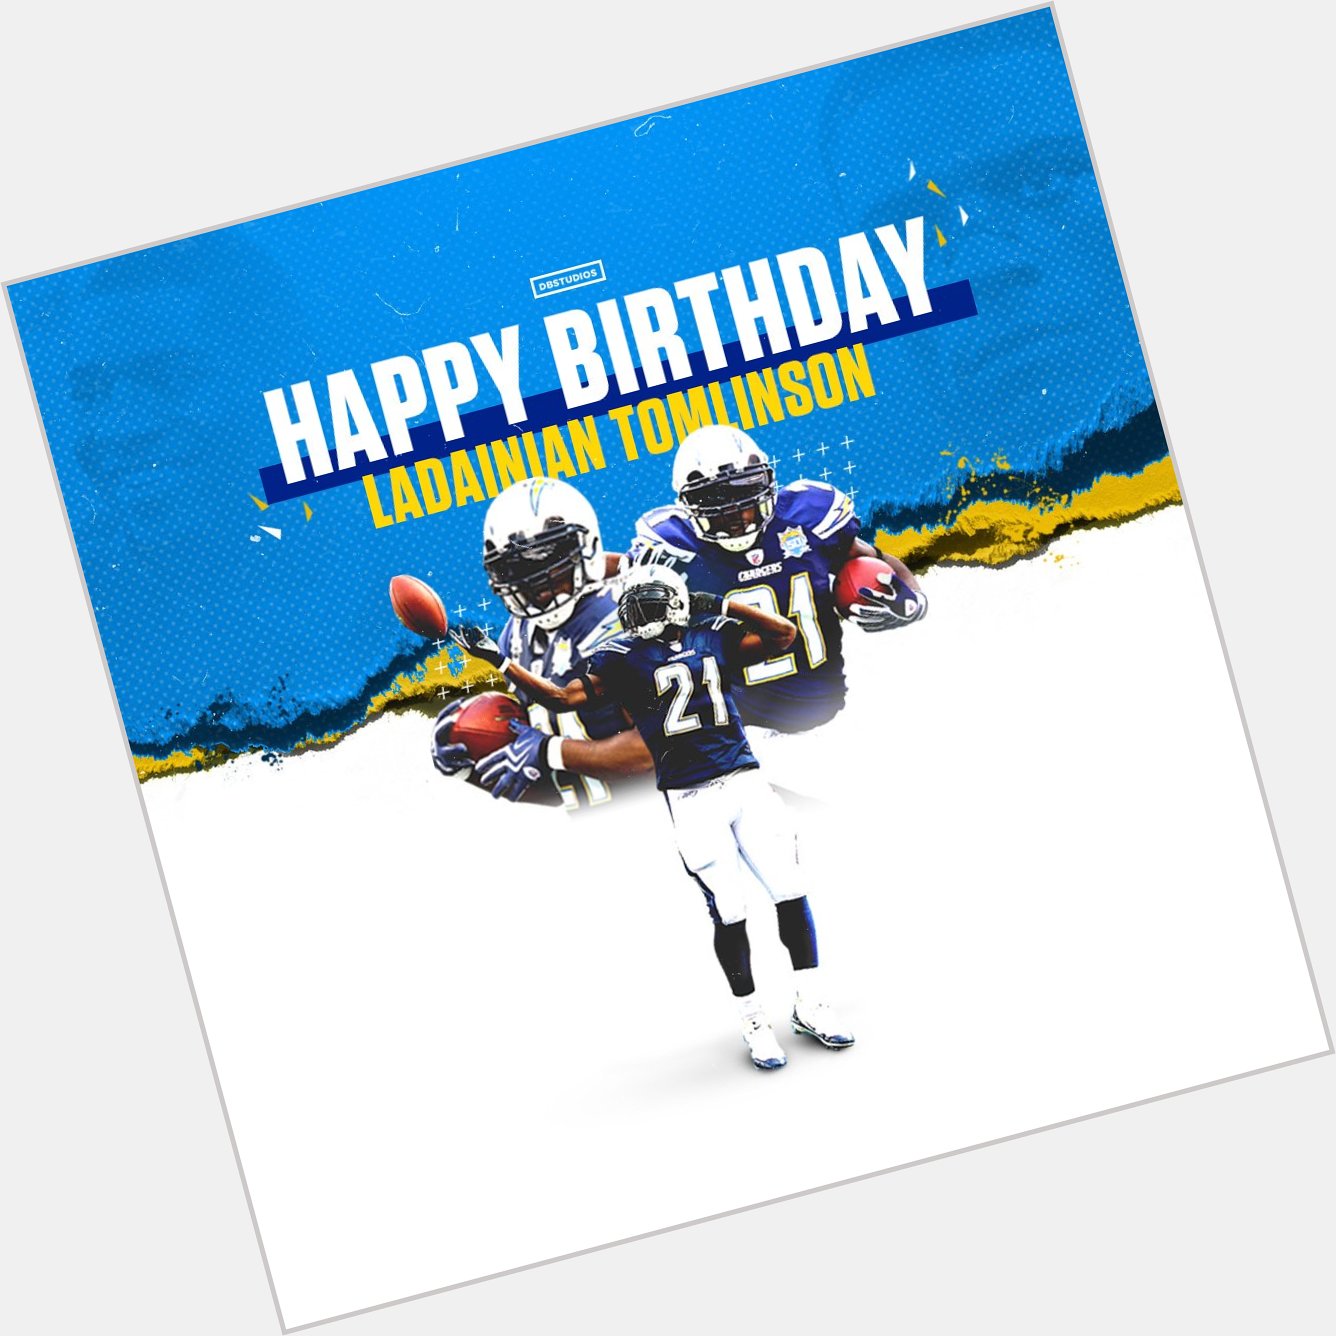 Happy Birthday Ladainian Tomlinson Graphic made by  